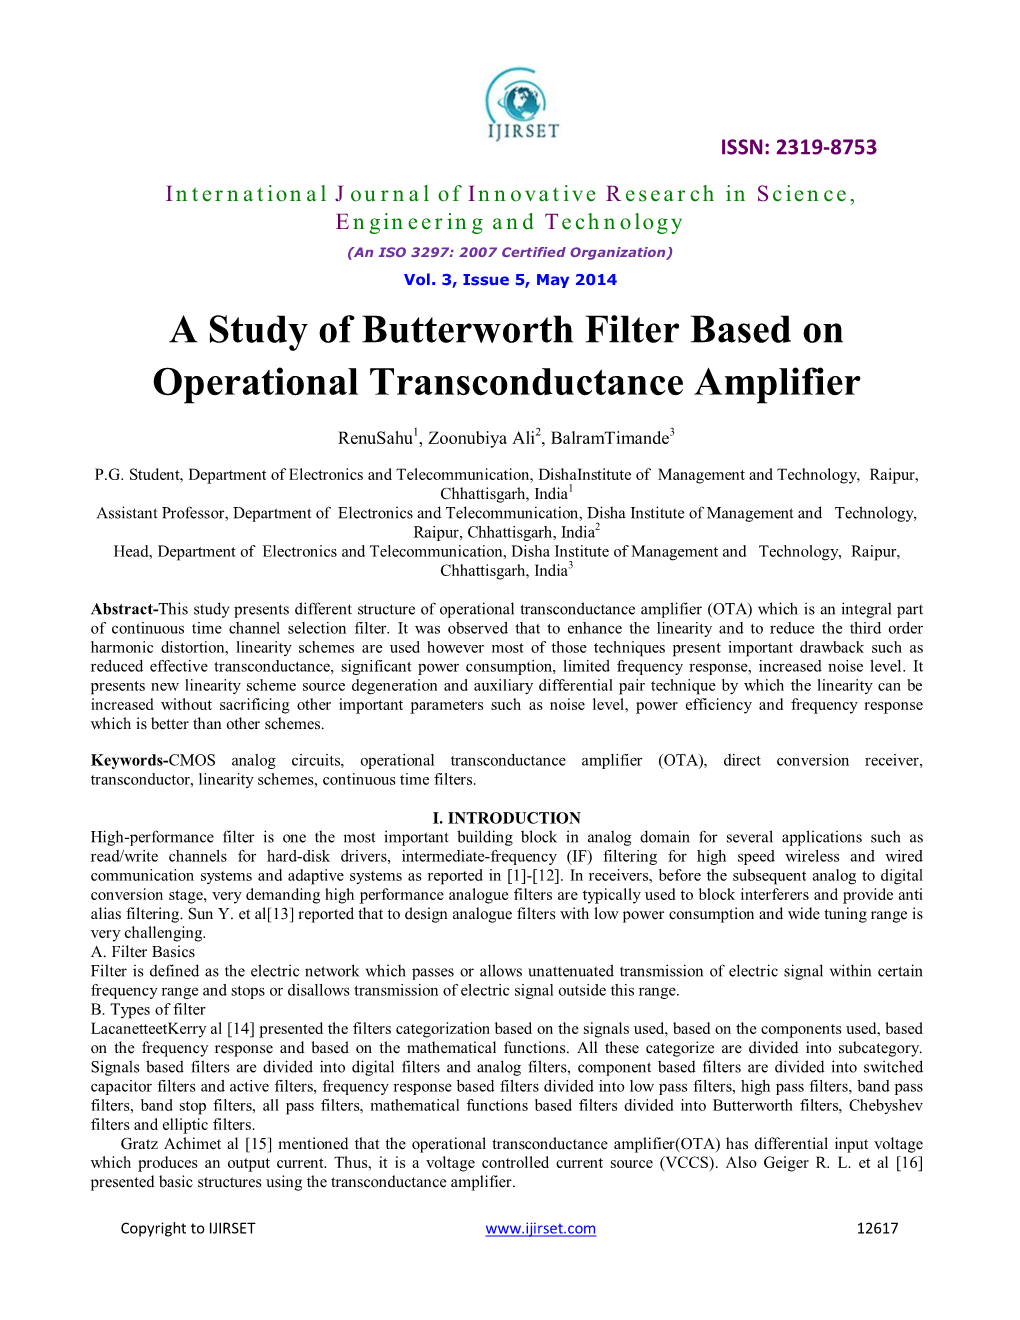 A Study of Butterworth Filter Based on Operational Transconductance Amplifier